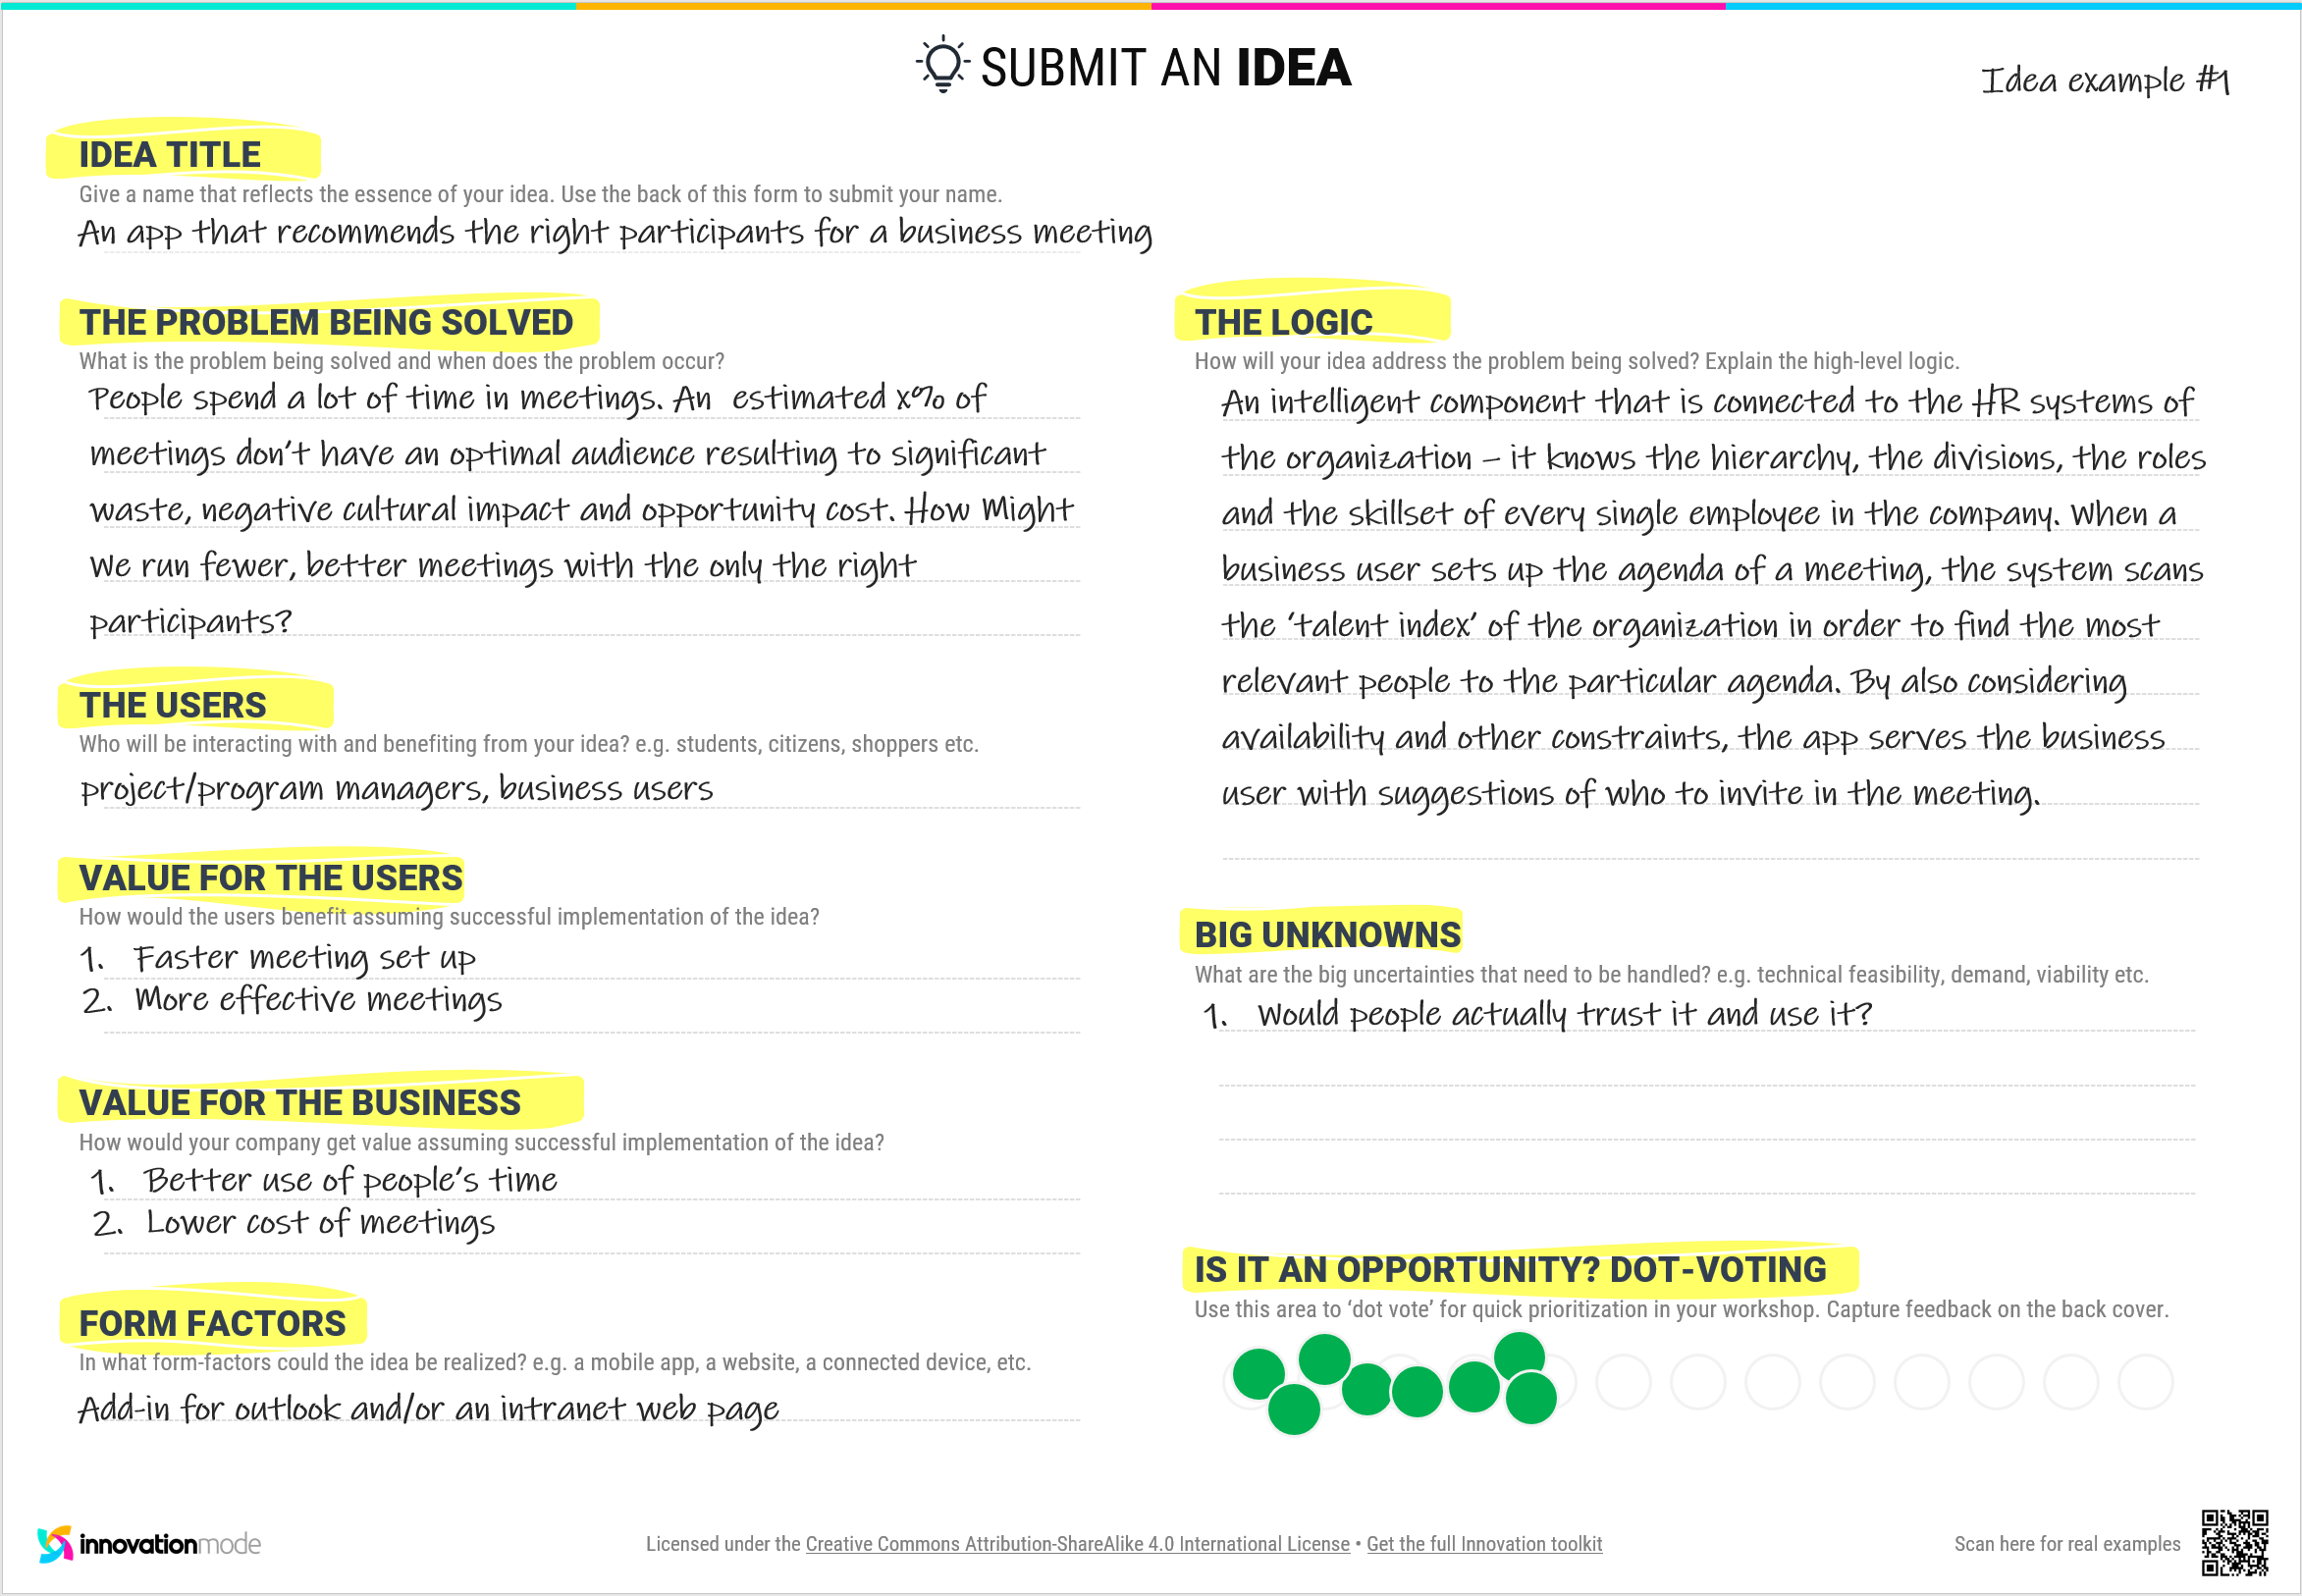 Free templates for brainstorming and ideas | Innovation Mode